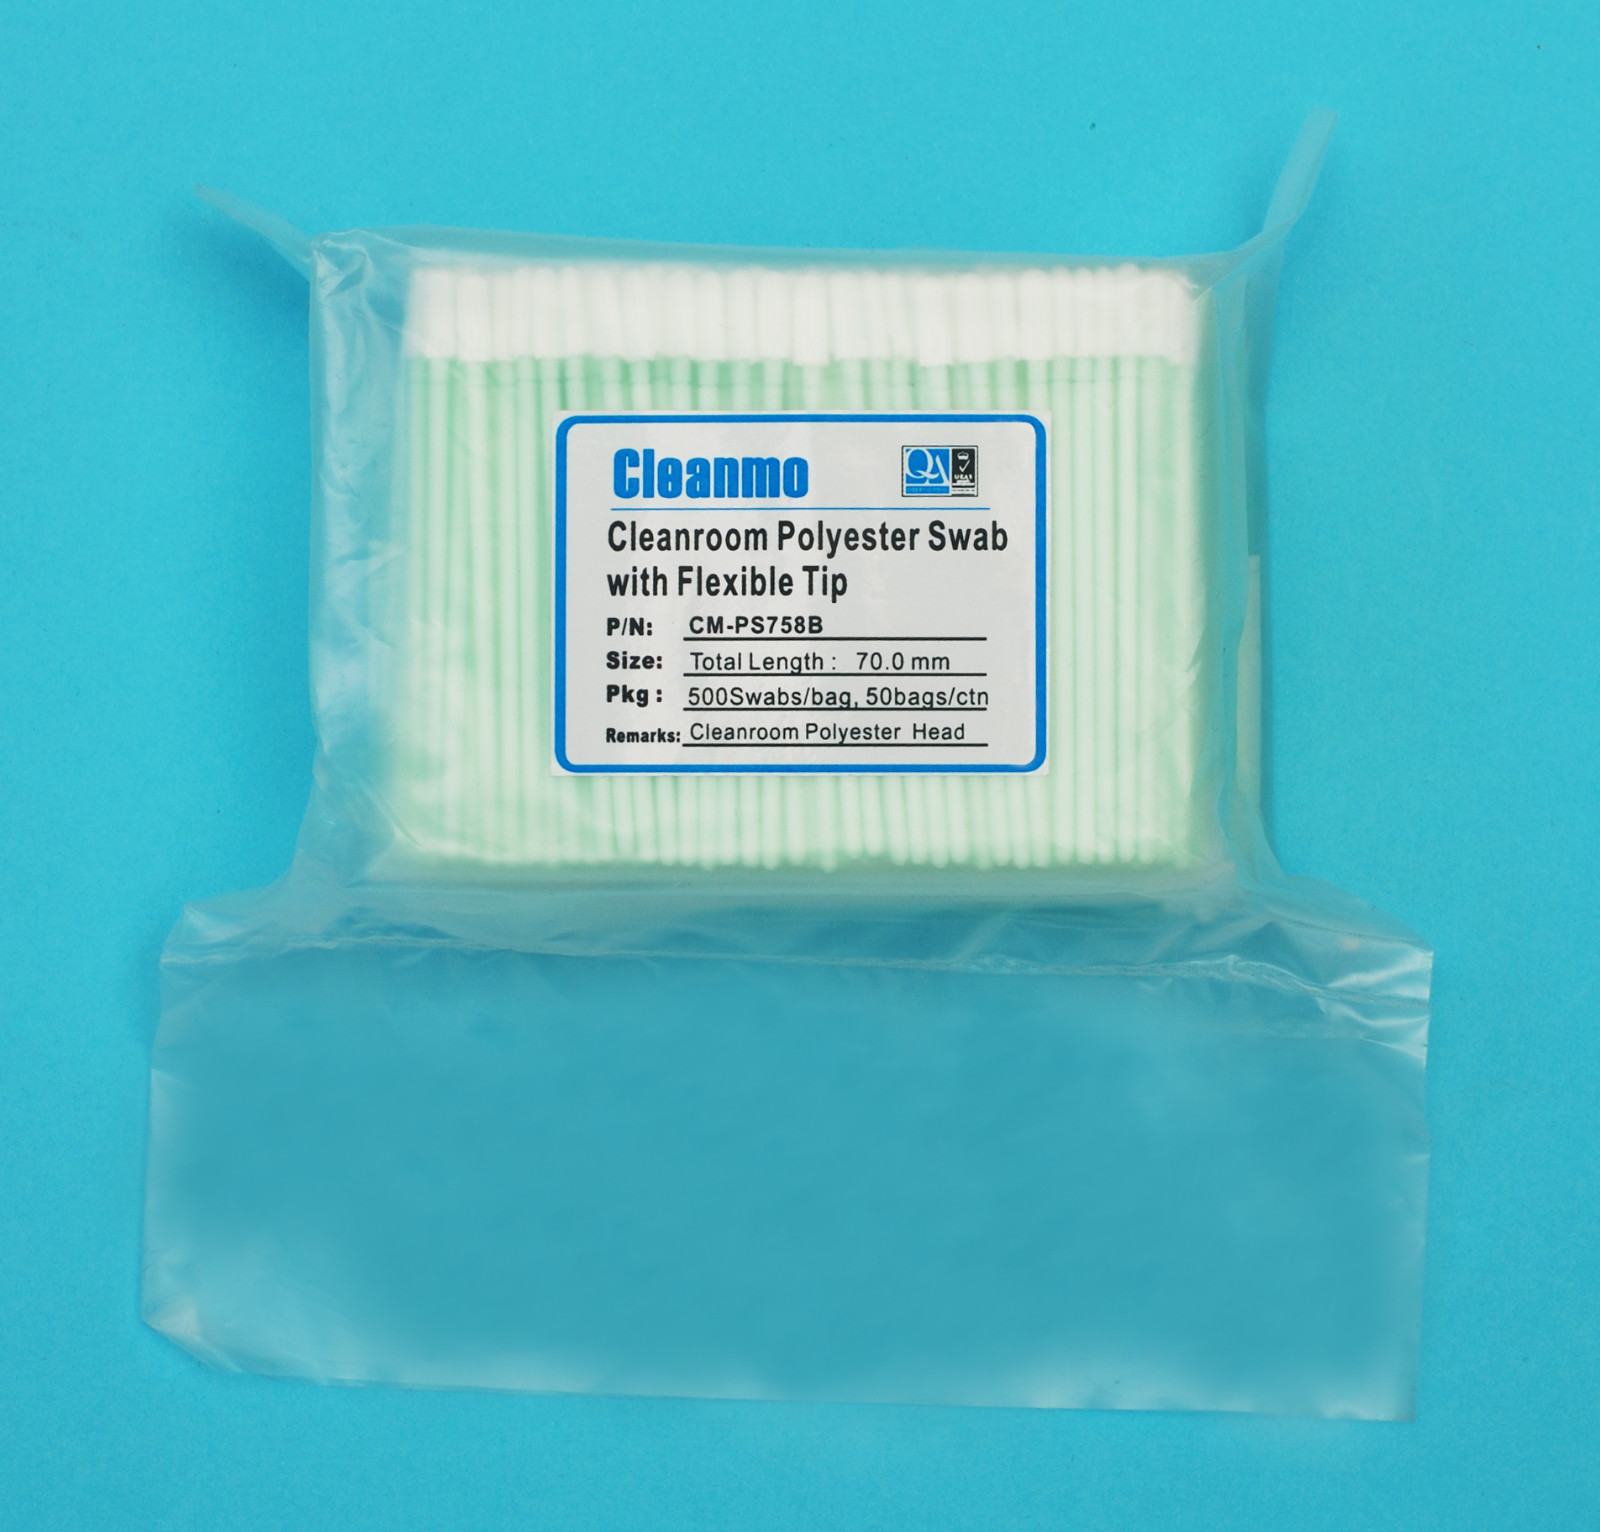 Cleanmo safe material polyester cleanroom swabs manufacturer for optical sensors-5